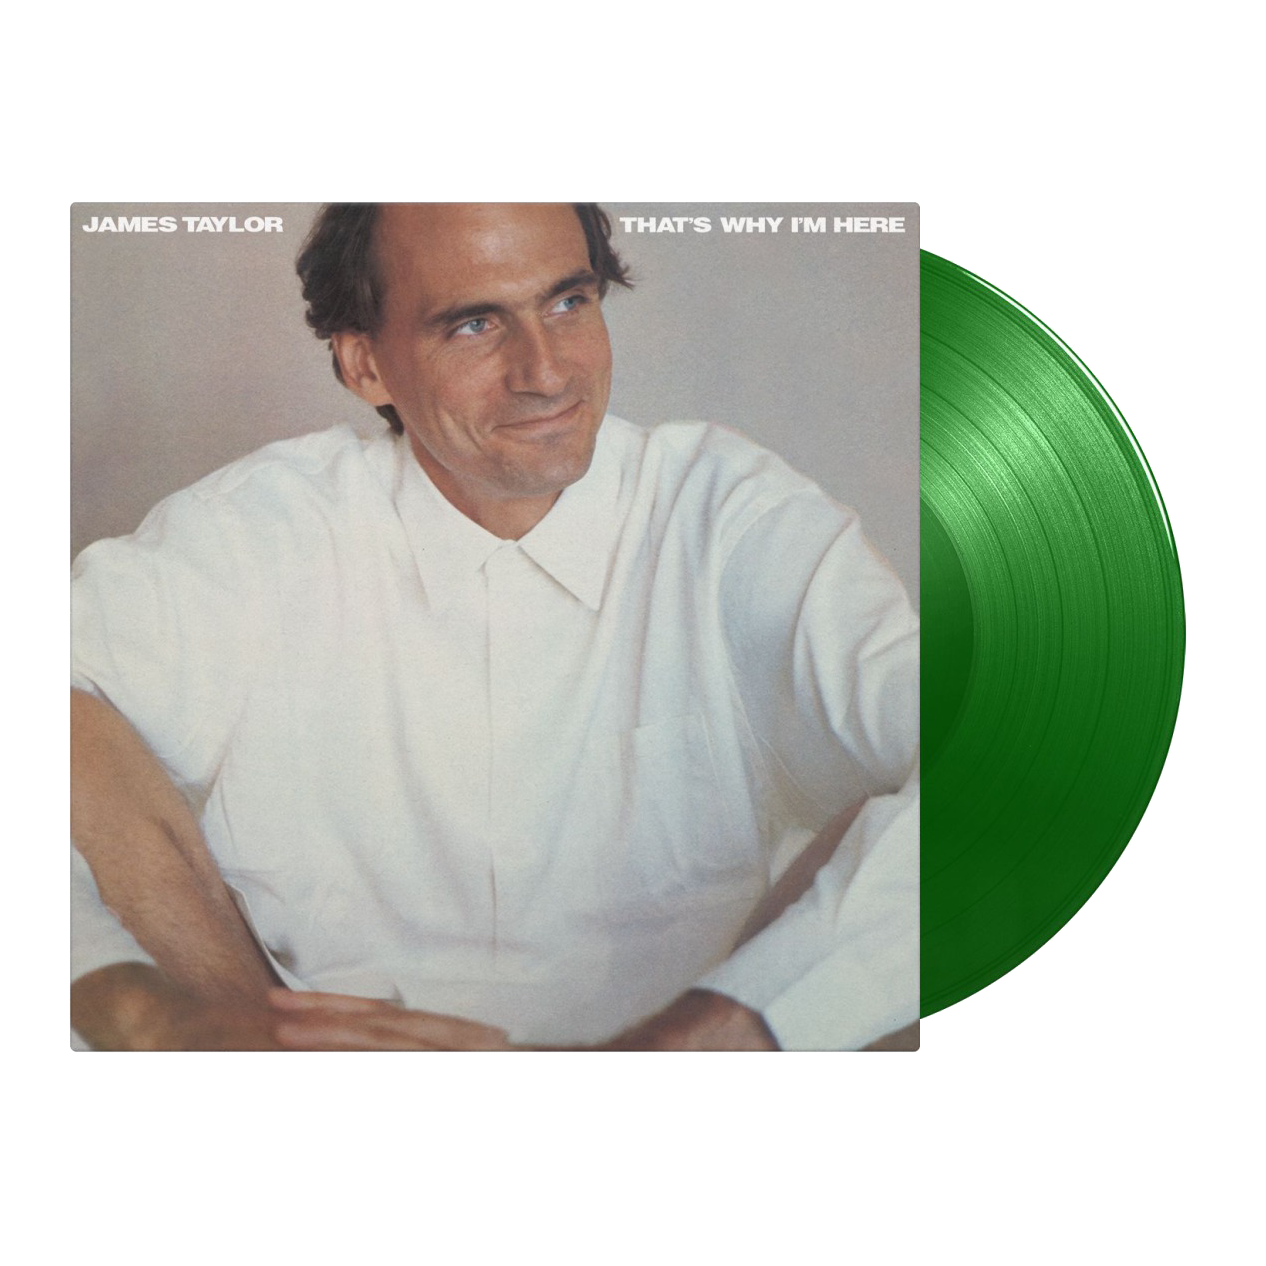 James Taylor - That's Why I'm Here: Limited Green Vinyl LP